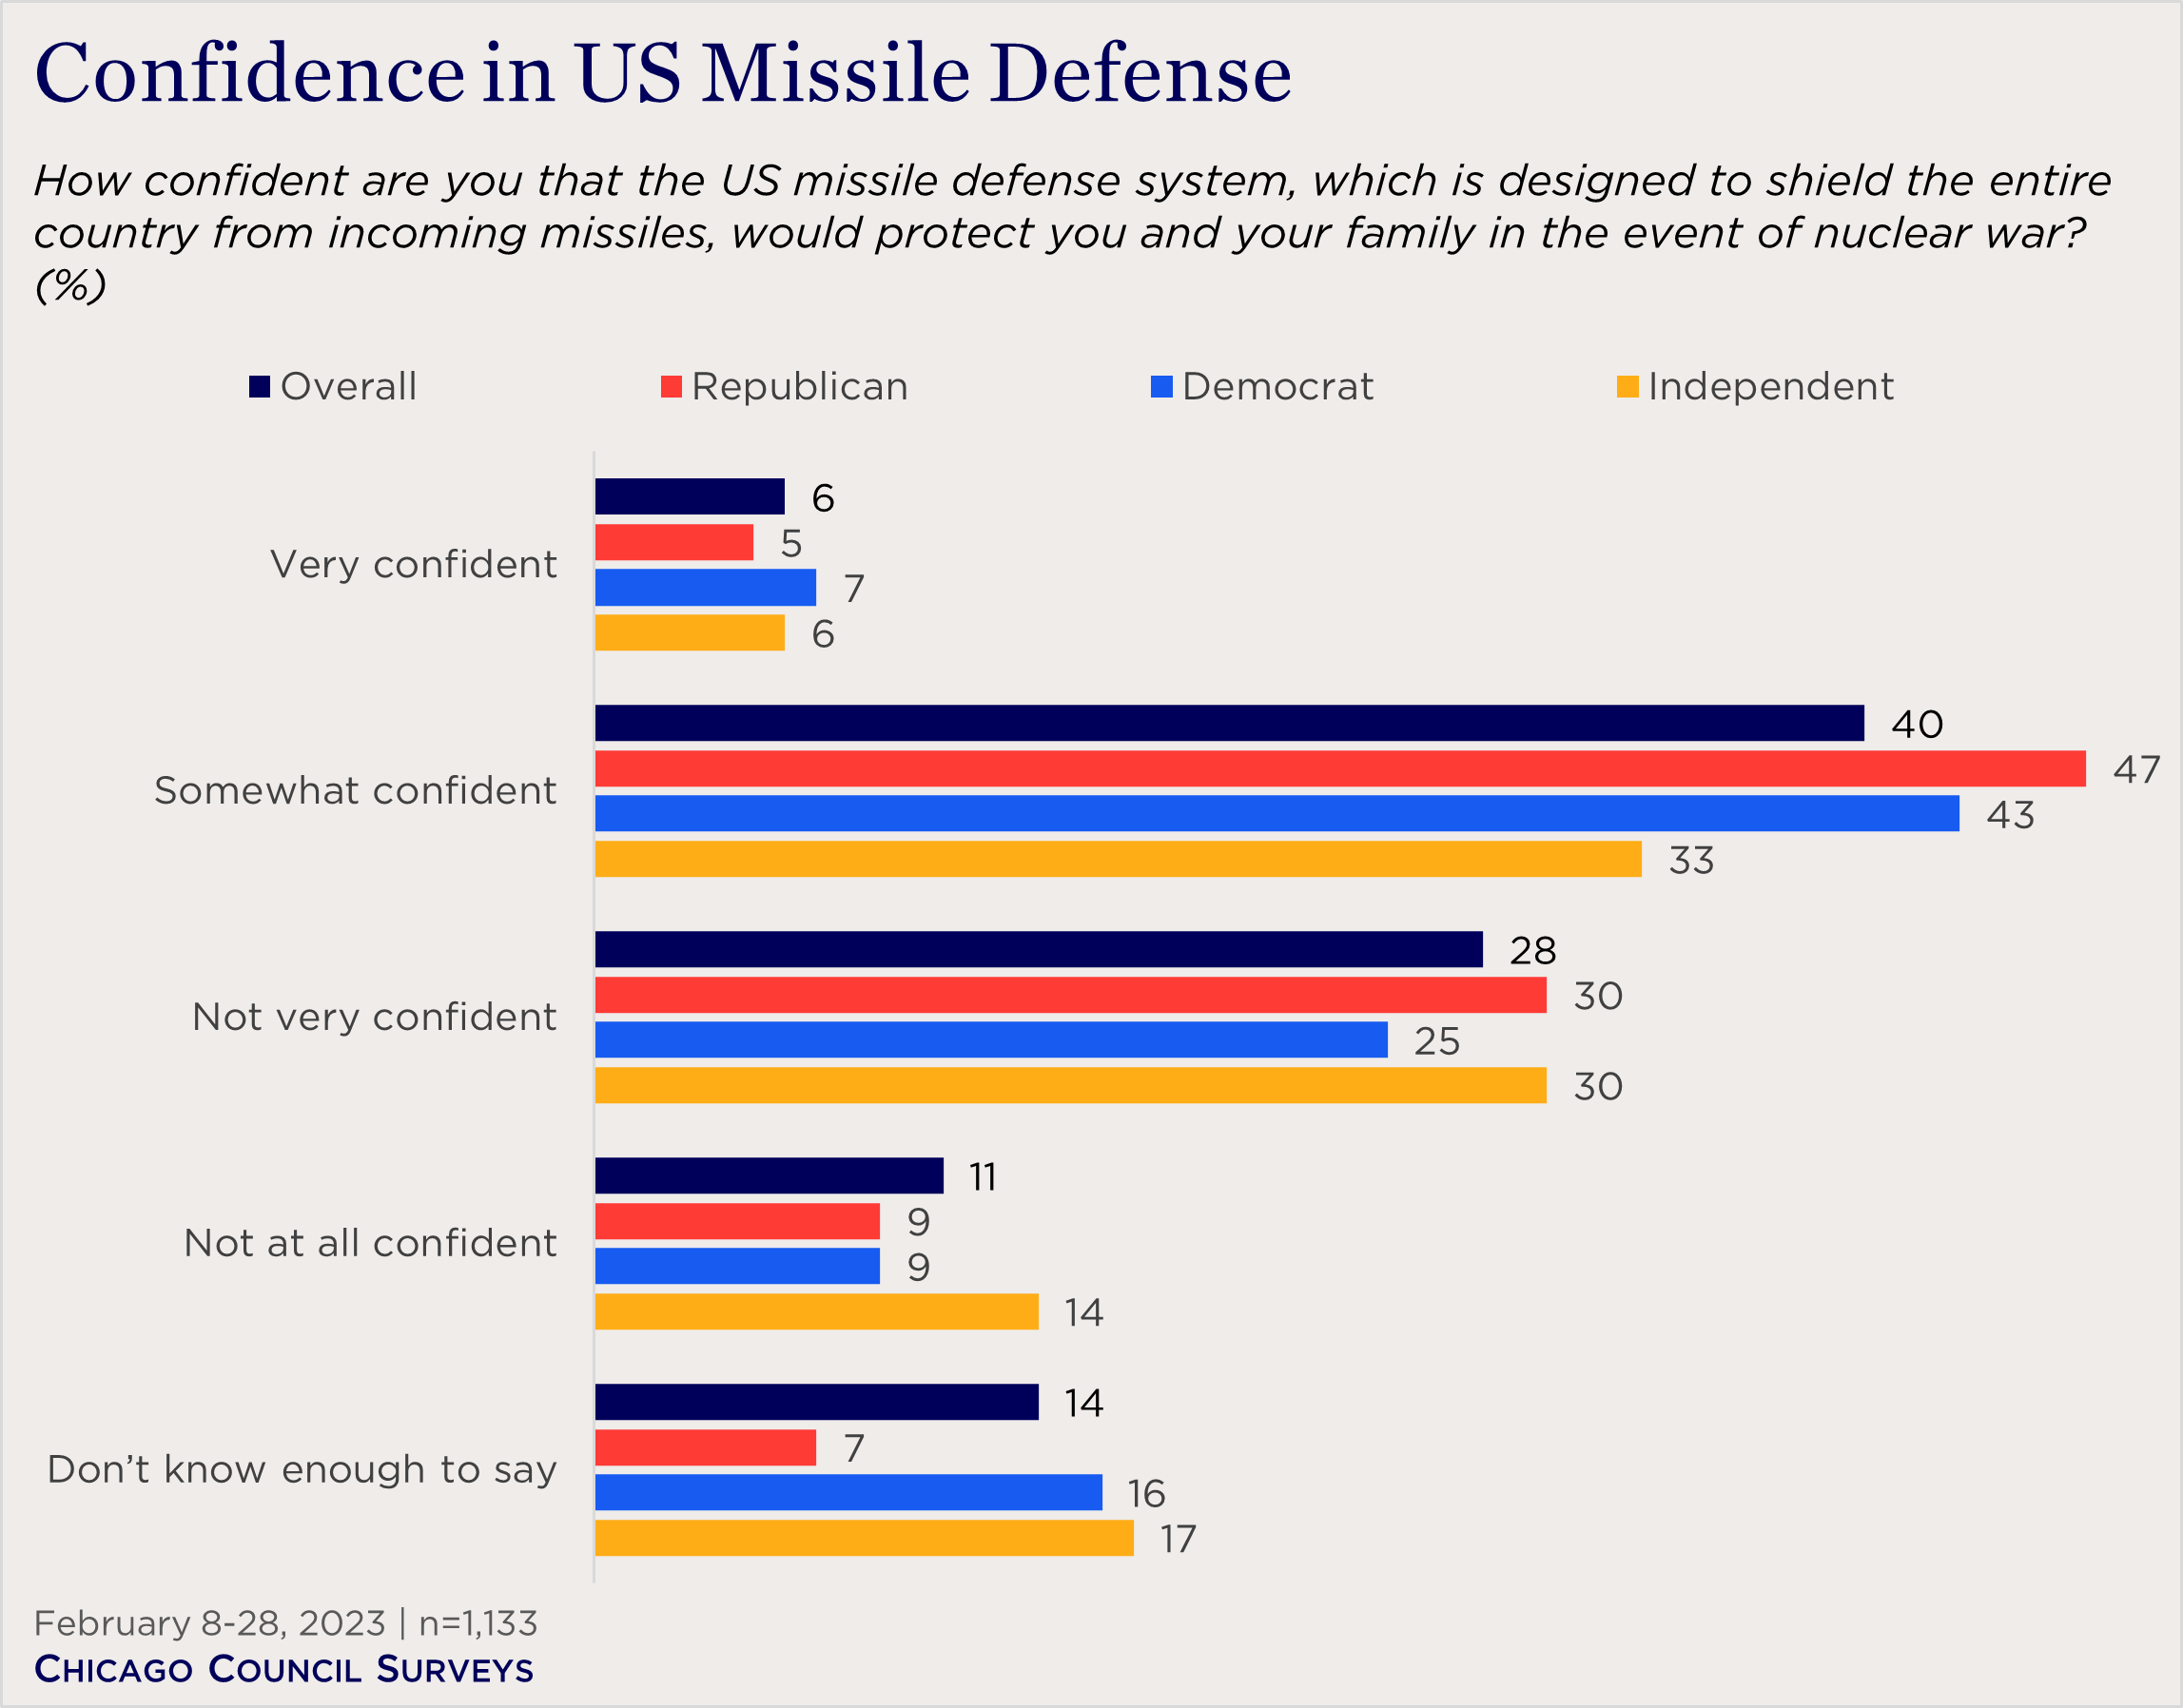 "bar chart showing confidence in US missile defense"